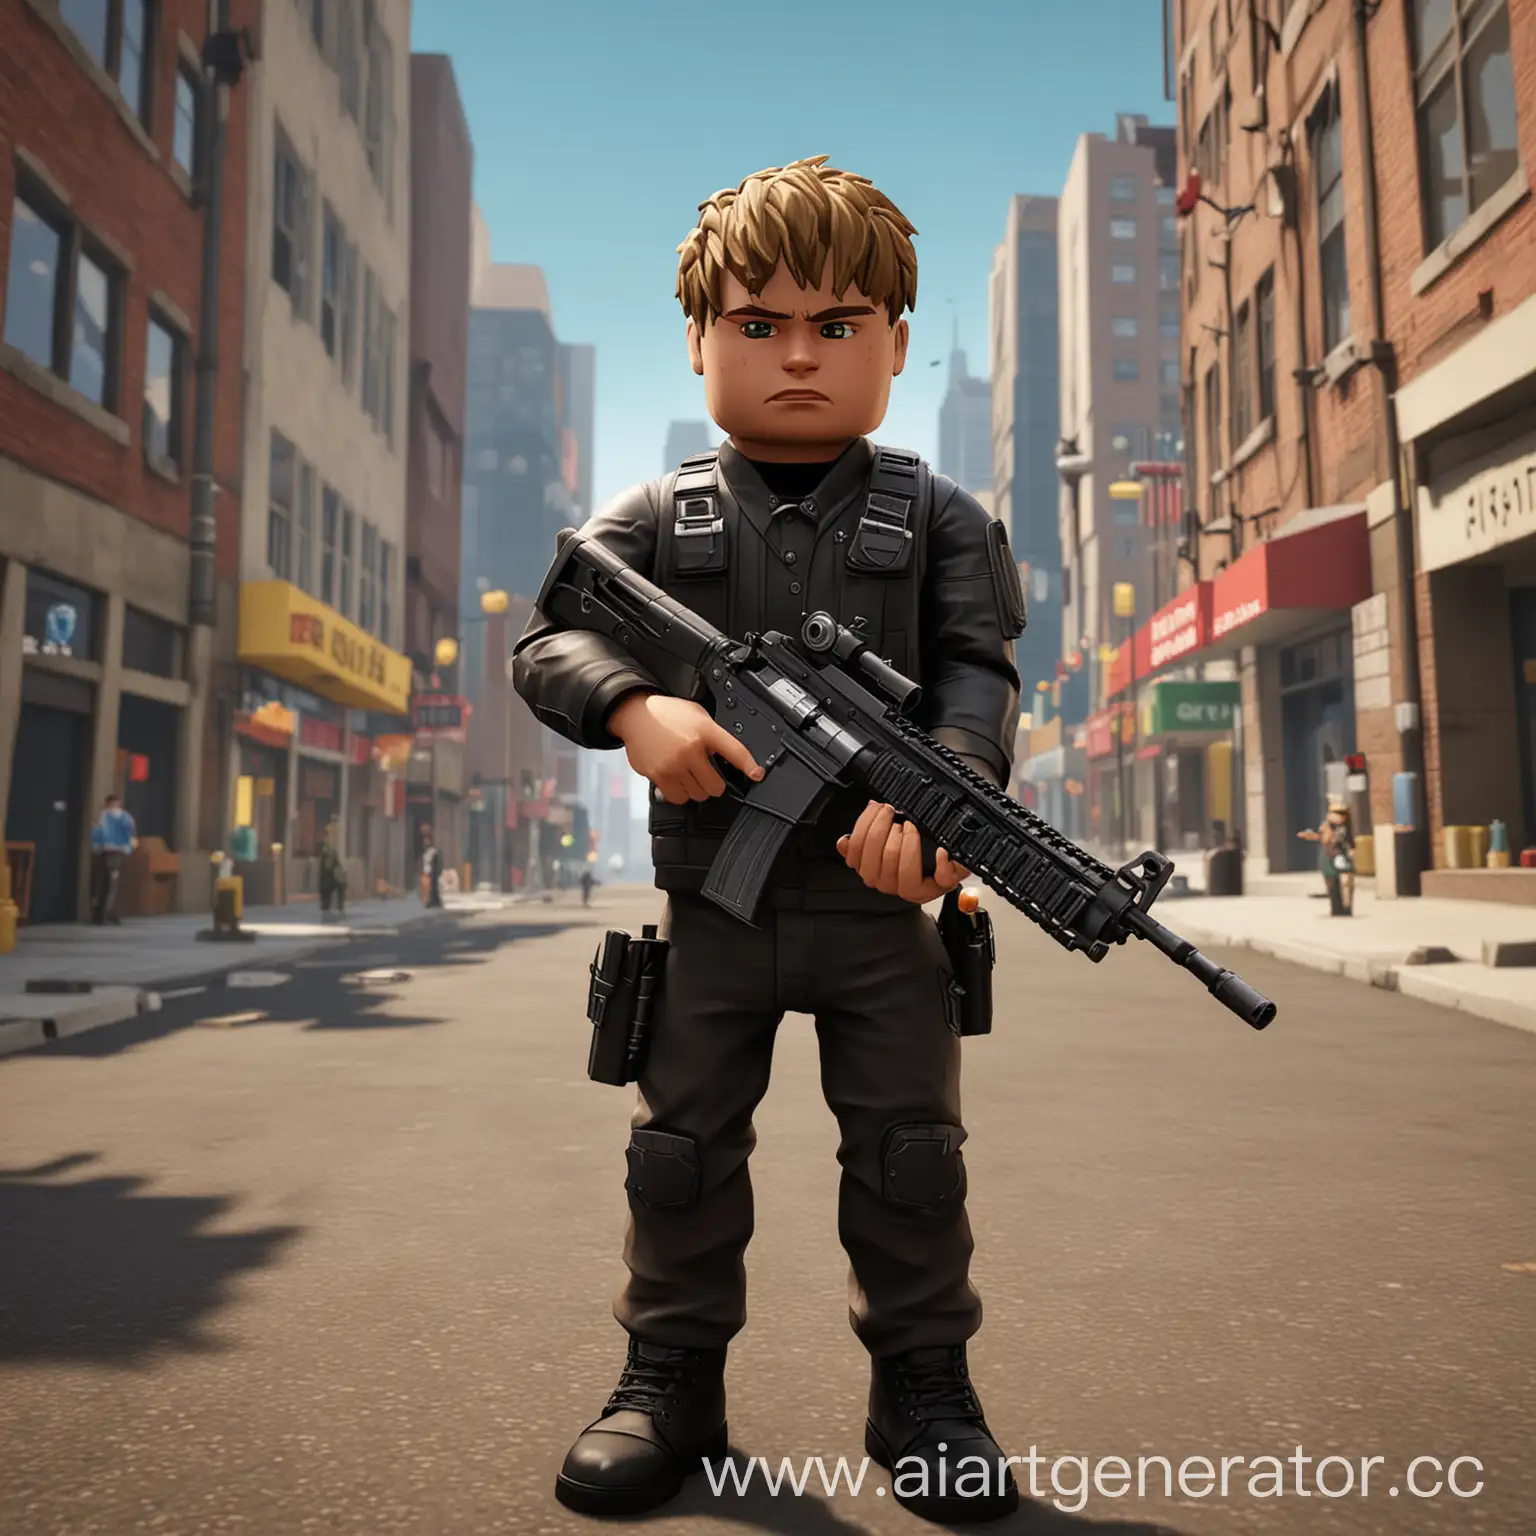 Roblox-Shooter-in-Urban-Environment-with-Weapons